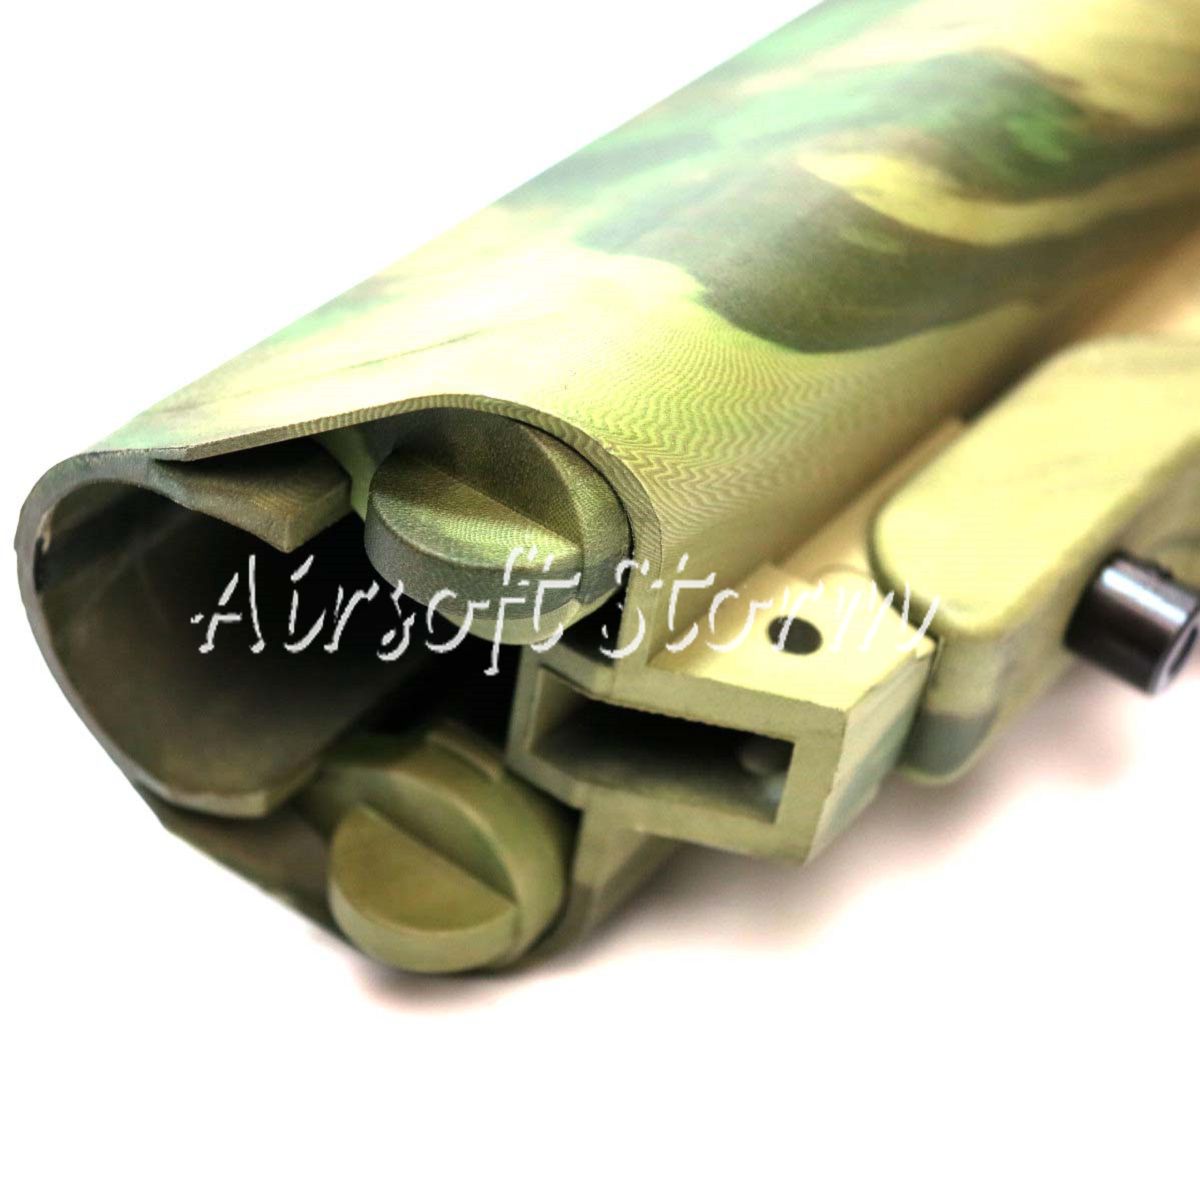 Airsoft Tactical Gear APS ASR Crane Airsoft AEG Stock With Sling Swivel A-TACS FG Camo - Click Image to Close